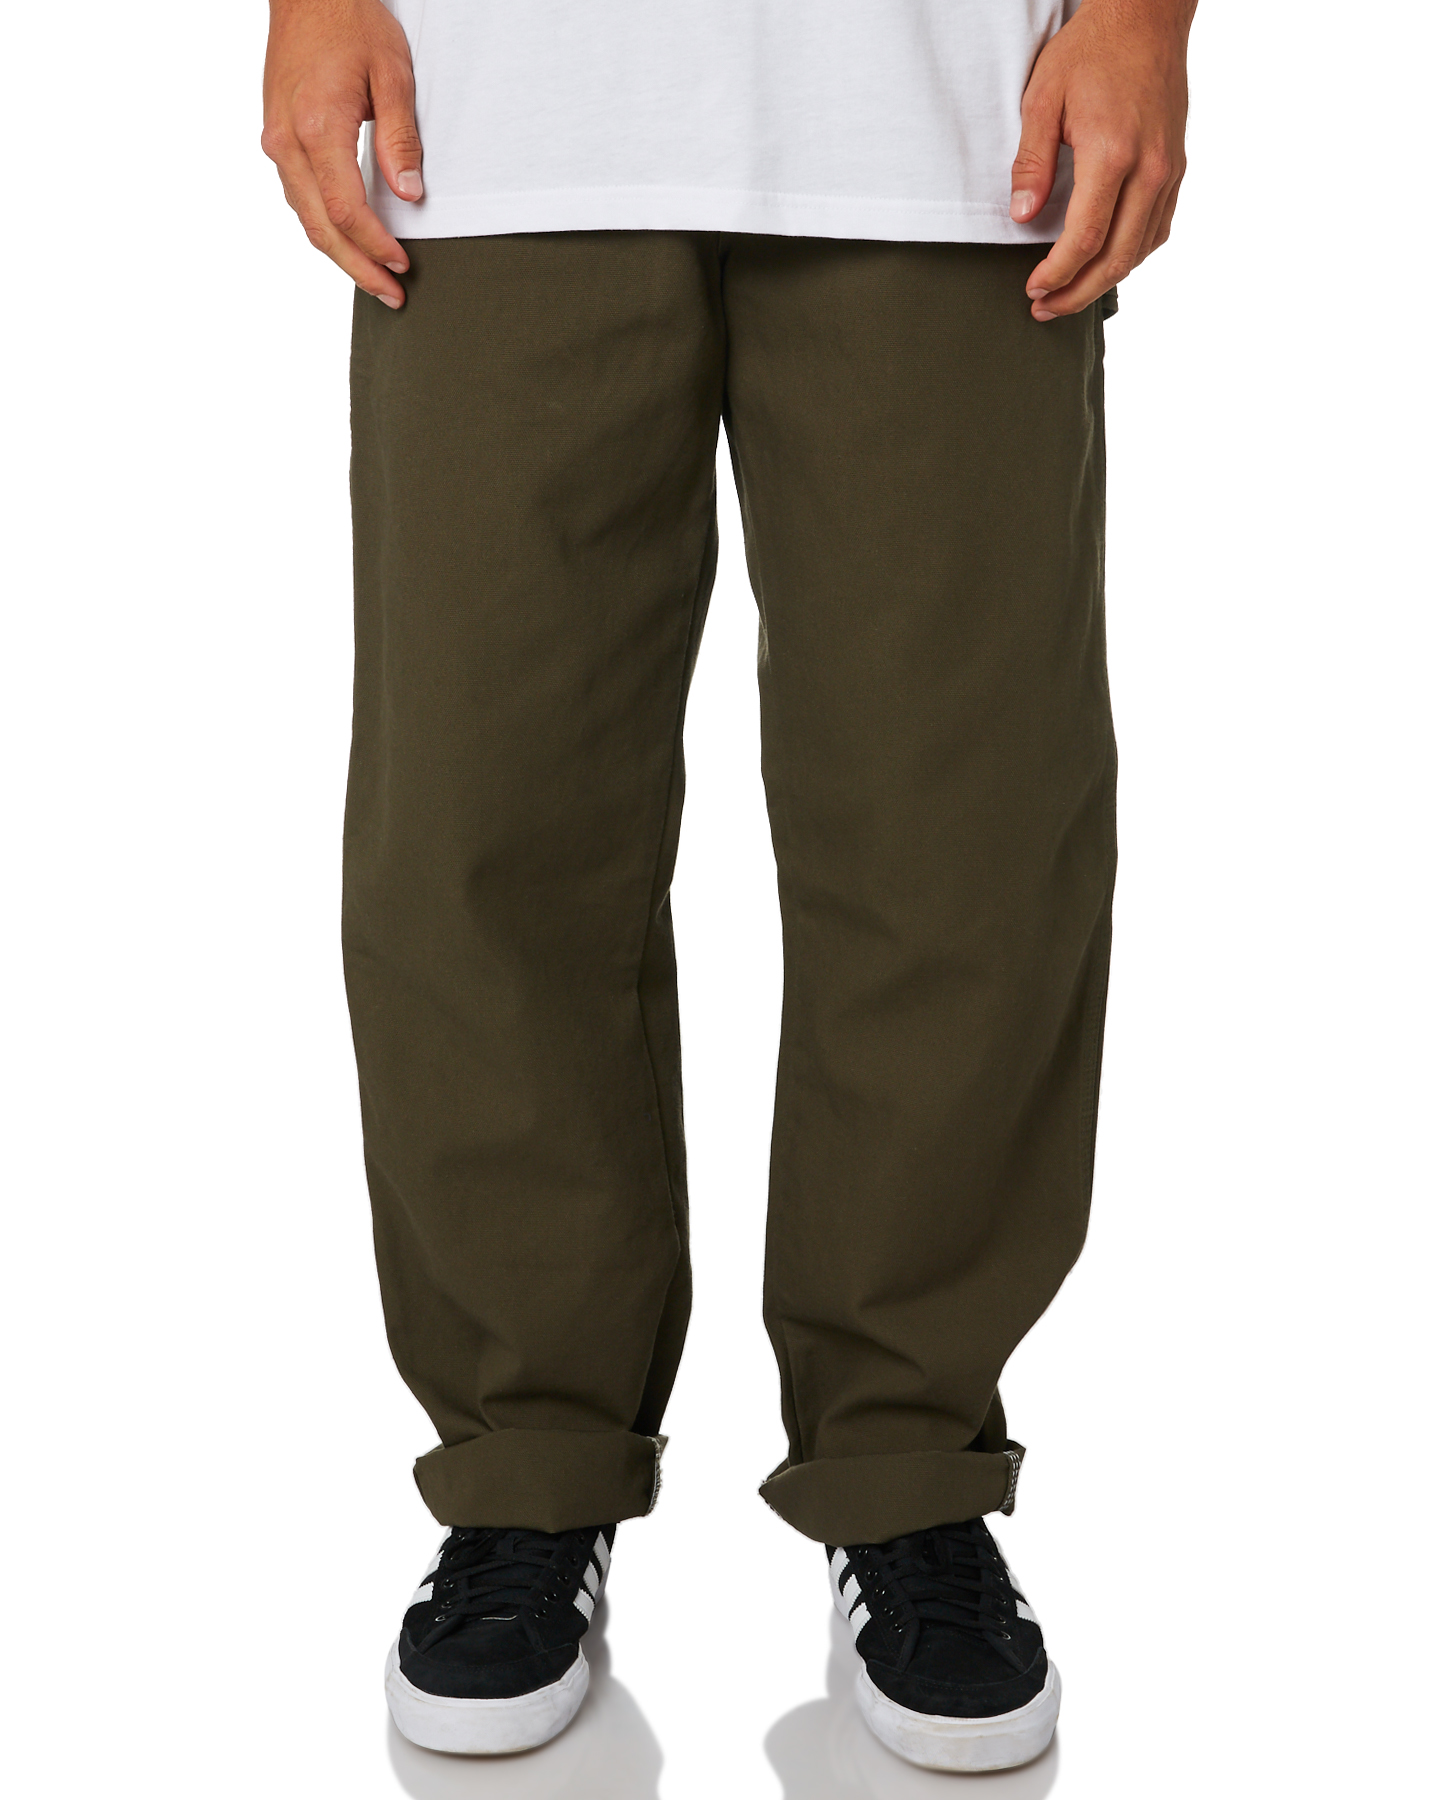 Dickies 1939 Relaxed Fit Duck Mens Carpenter Pant - Rinsed Moss Green